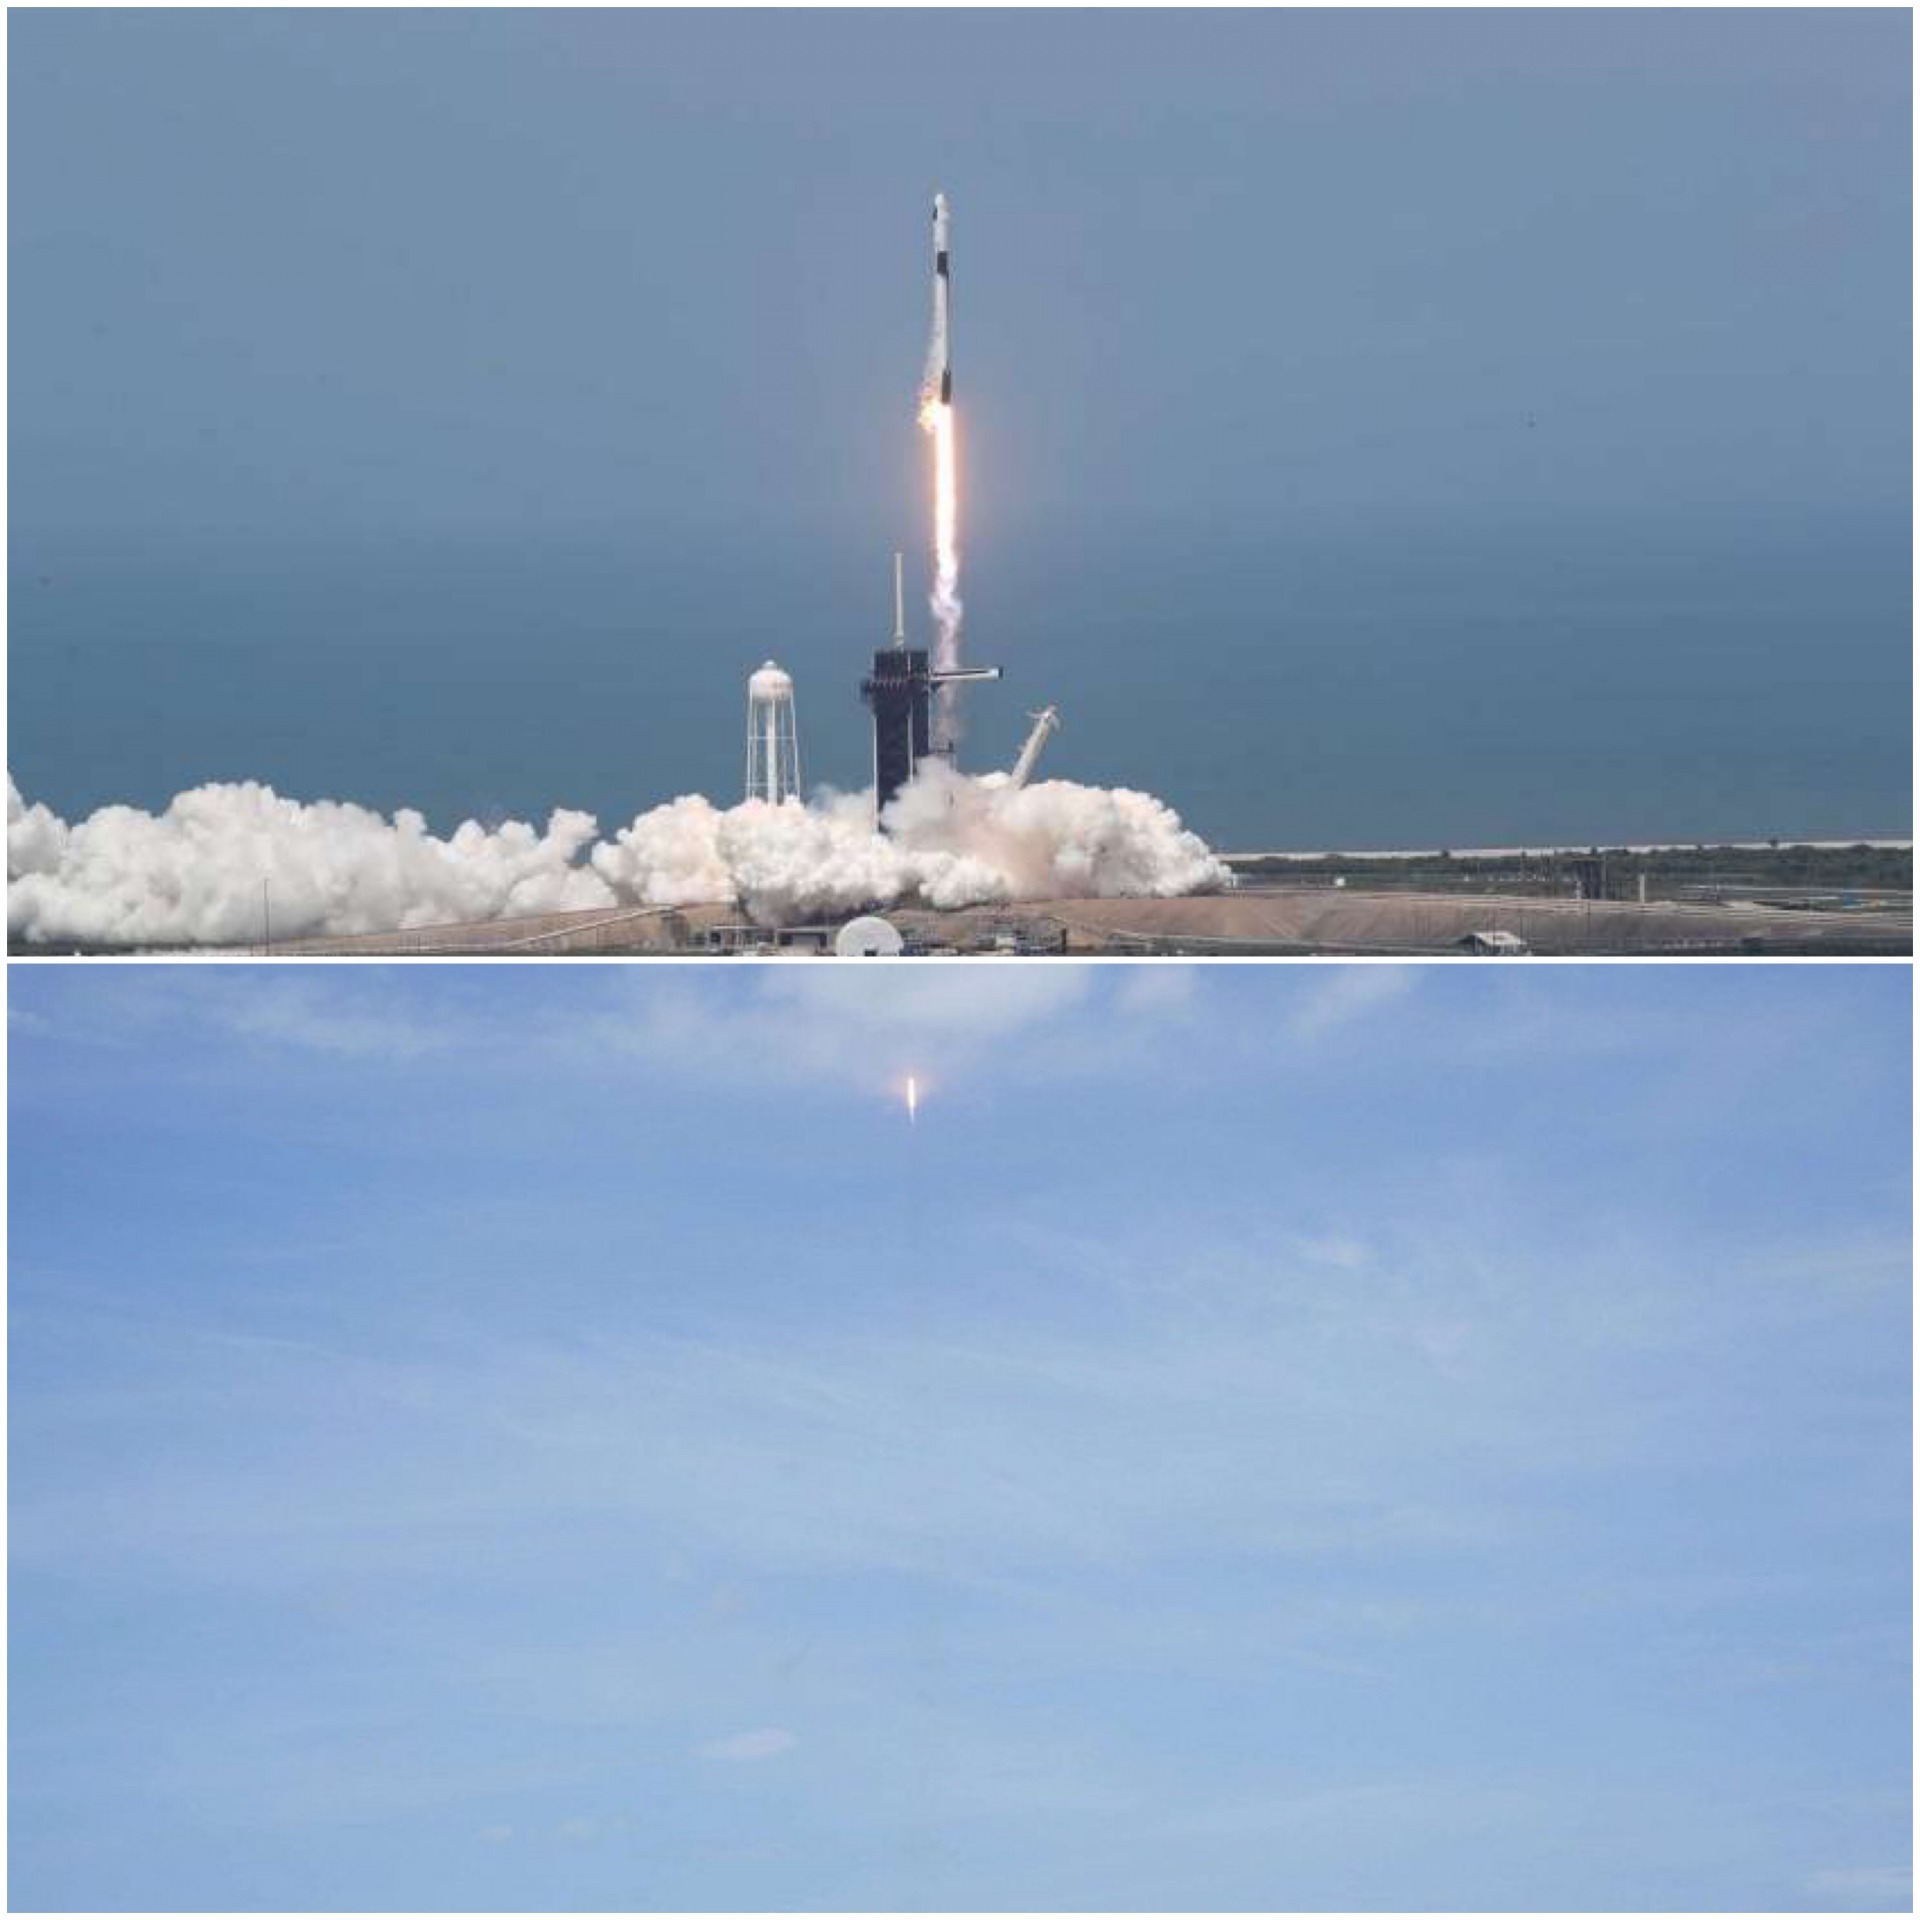 High Quality SpaceX launch May 30 2020 Blank Meme Template